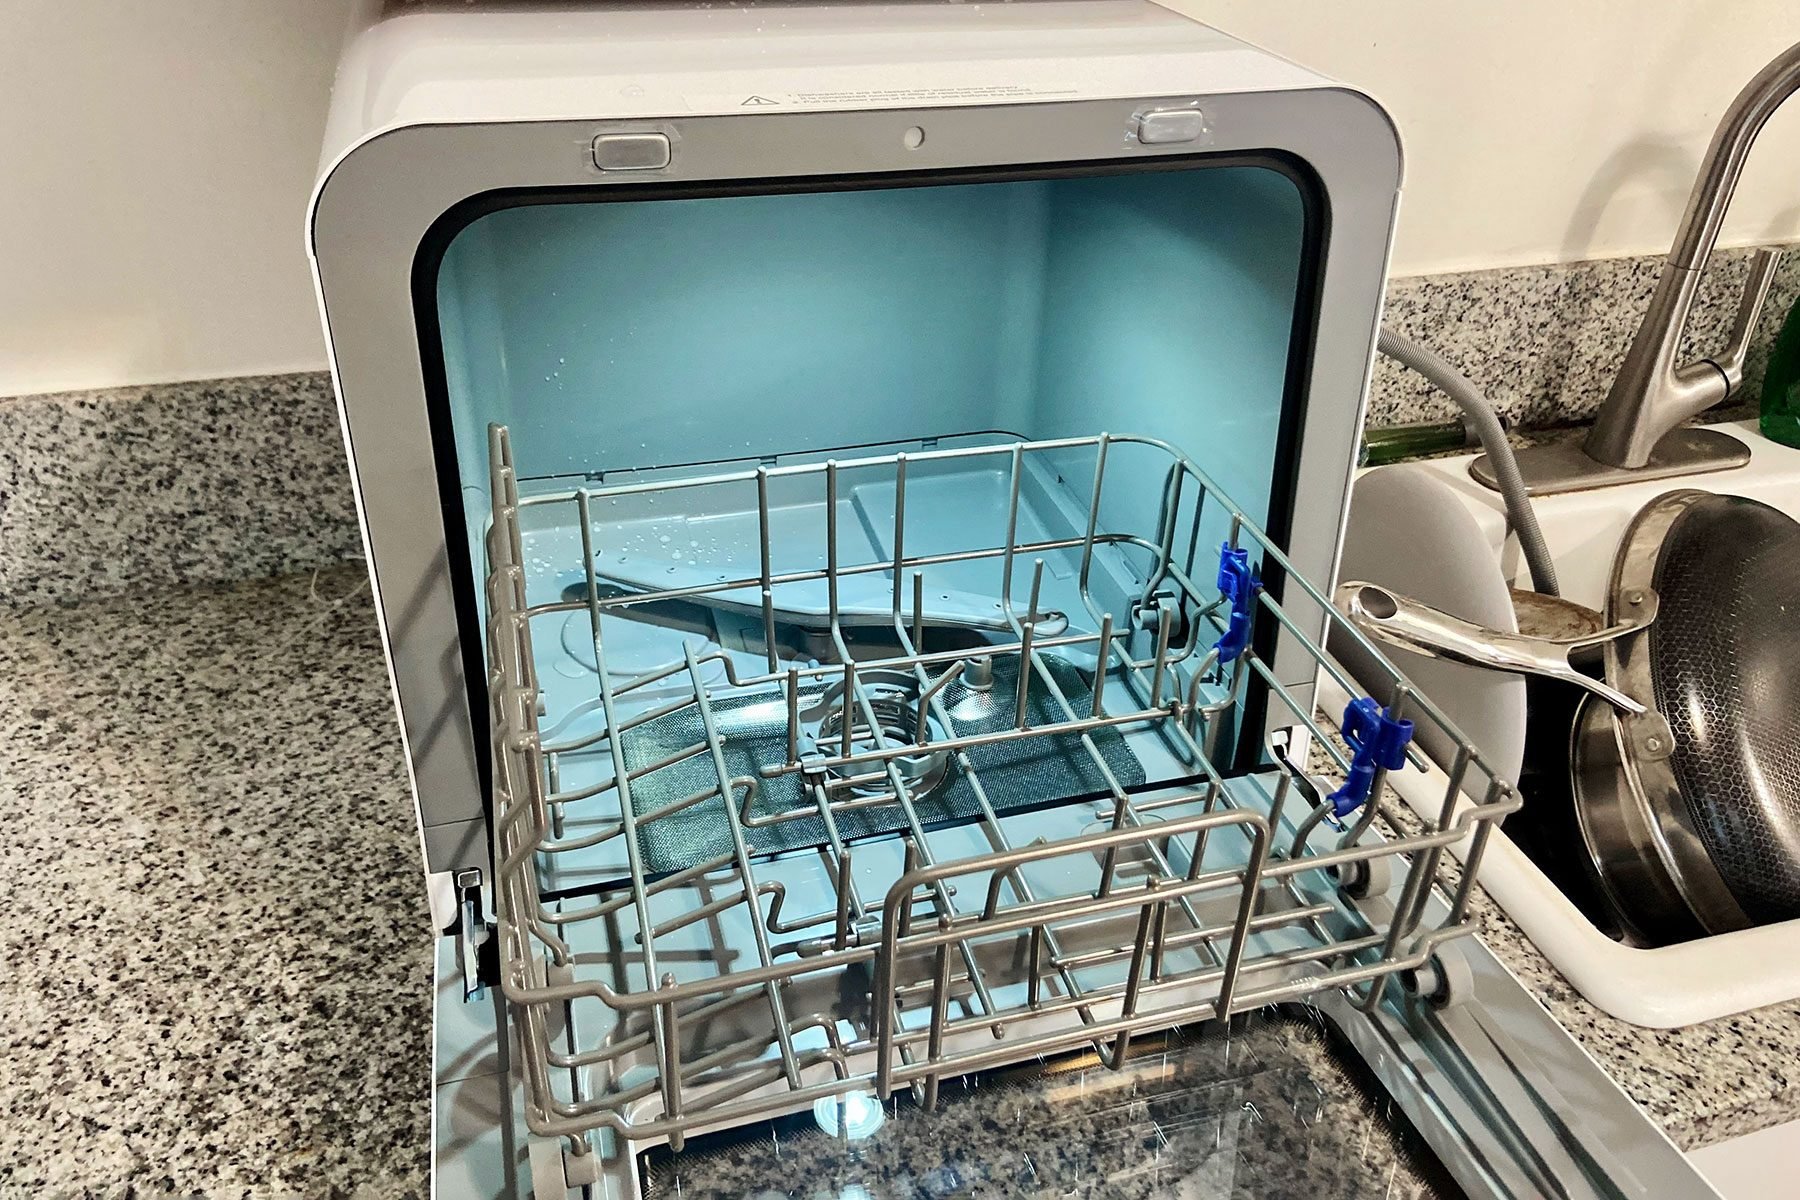 I Tried the Farberware Countertop Dishwasher and Dishes Take Me a Fraction of the Time